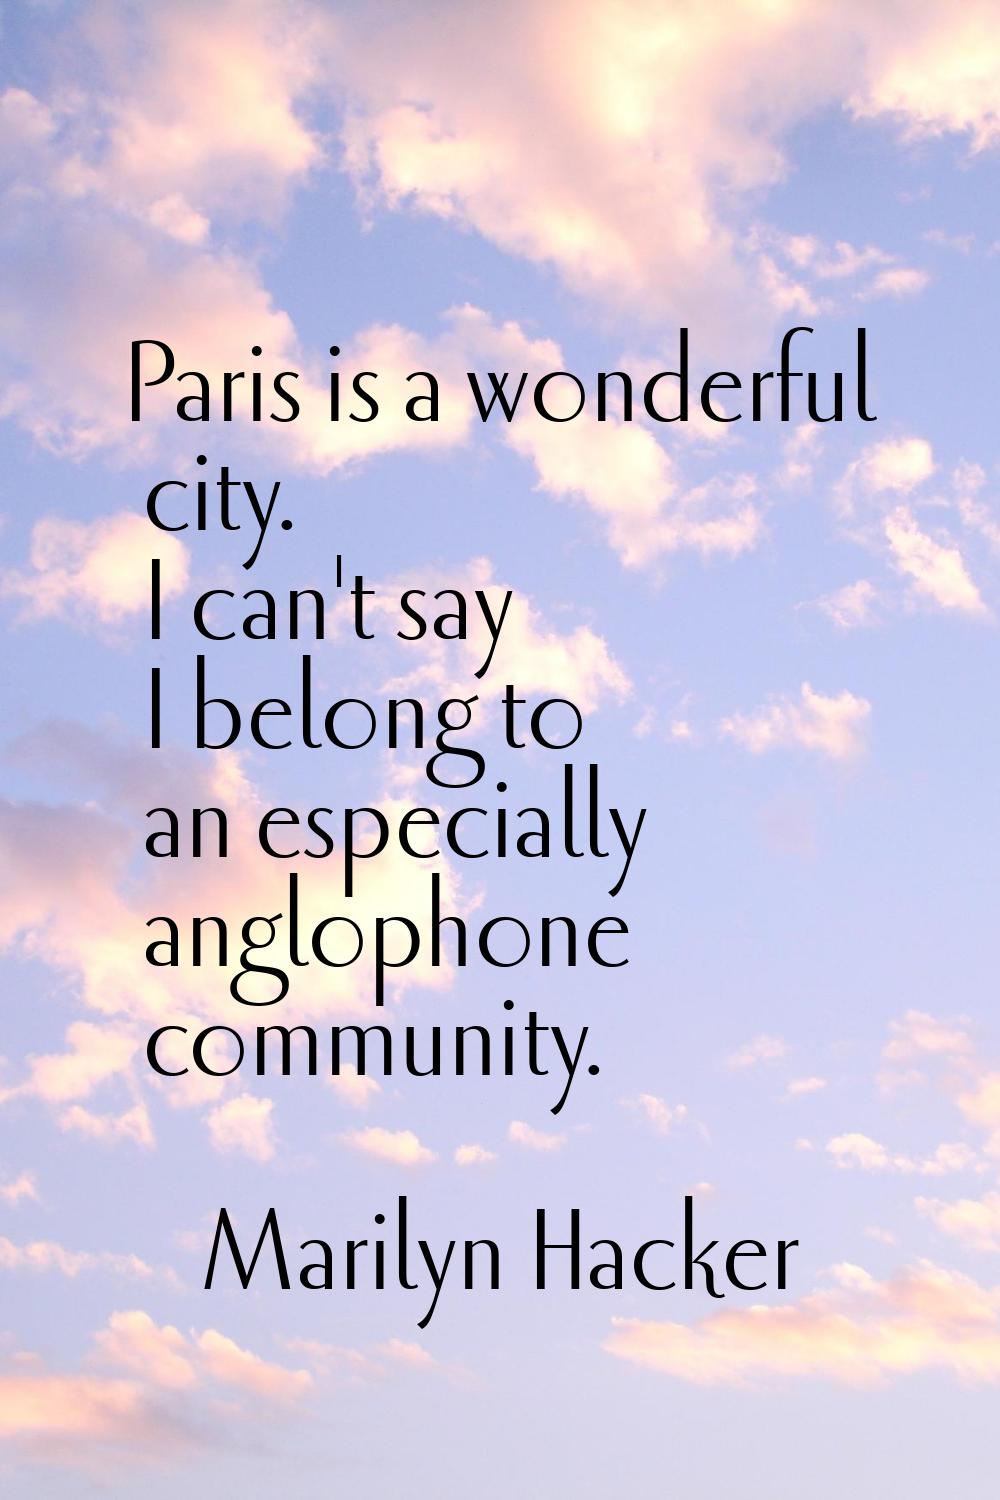 Paris is a wonderful city. I can't say I belong to an especially anglophone community.